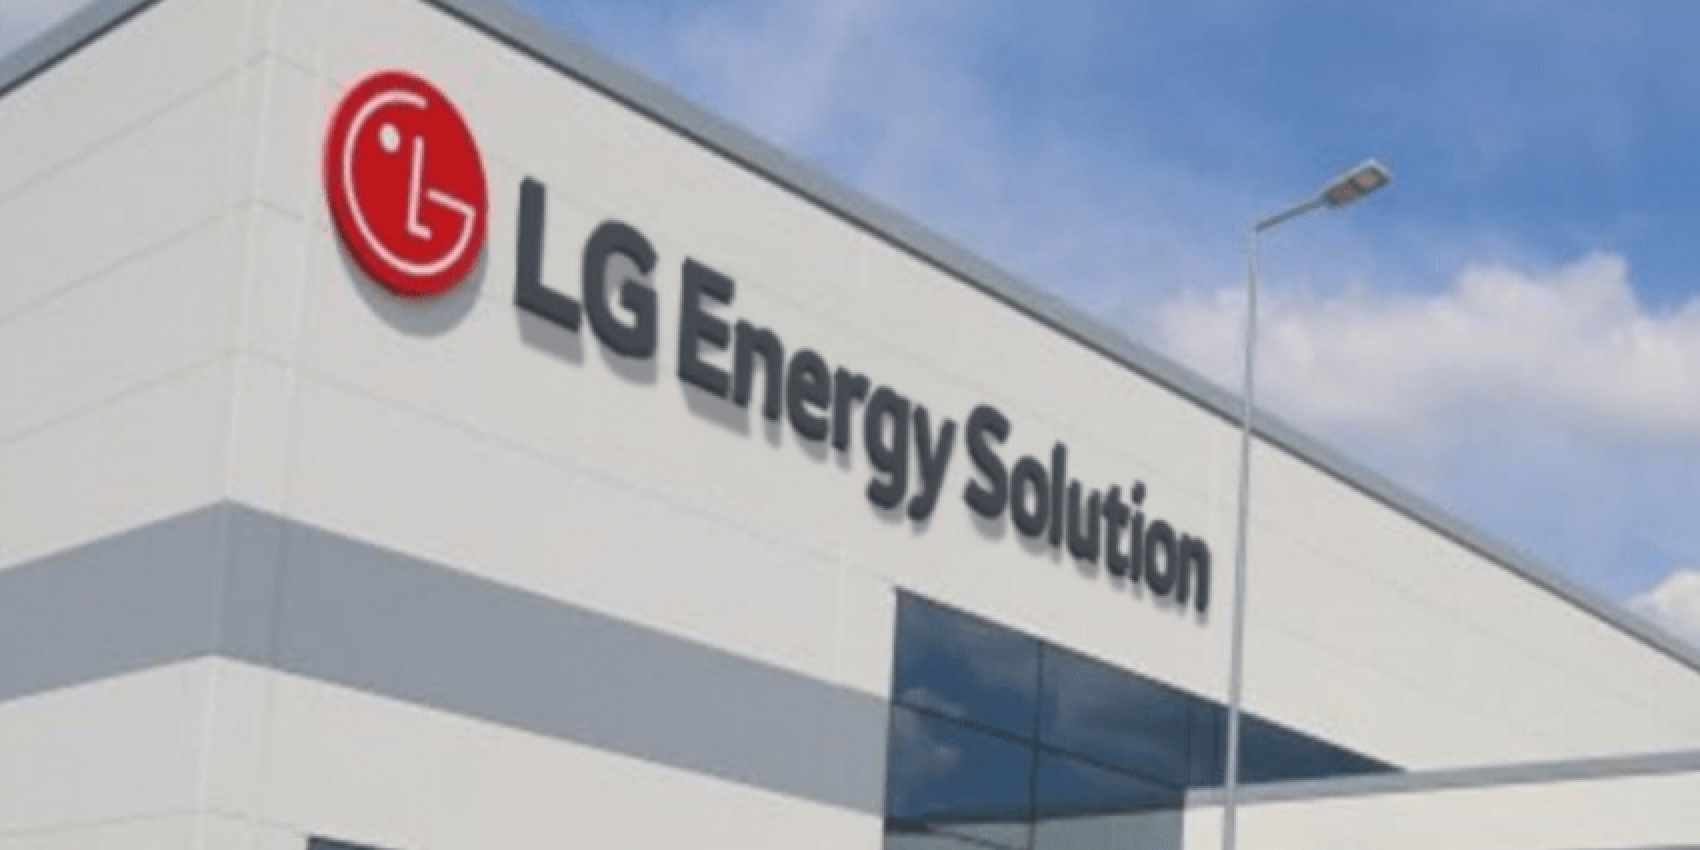 autos, battery & fuel cell, cars, electric vehicle, antam, batteries, indonesia, indonesia battery corporation, lg chem, lg energy solution, lx international, posco, pt aneka tambang, resources, suppliers, lg-led consortium launches supply chain project in indonesia